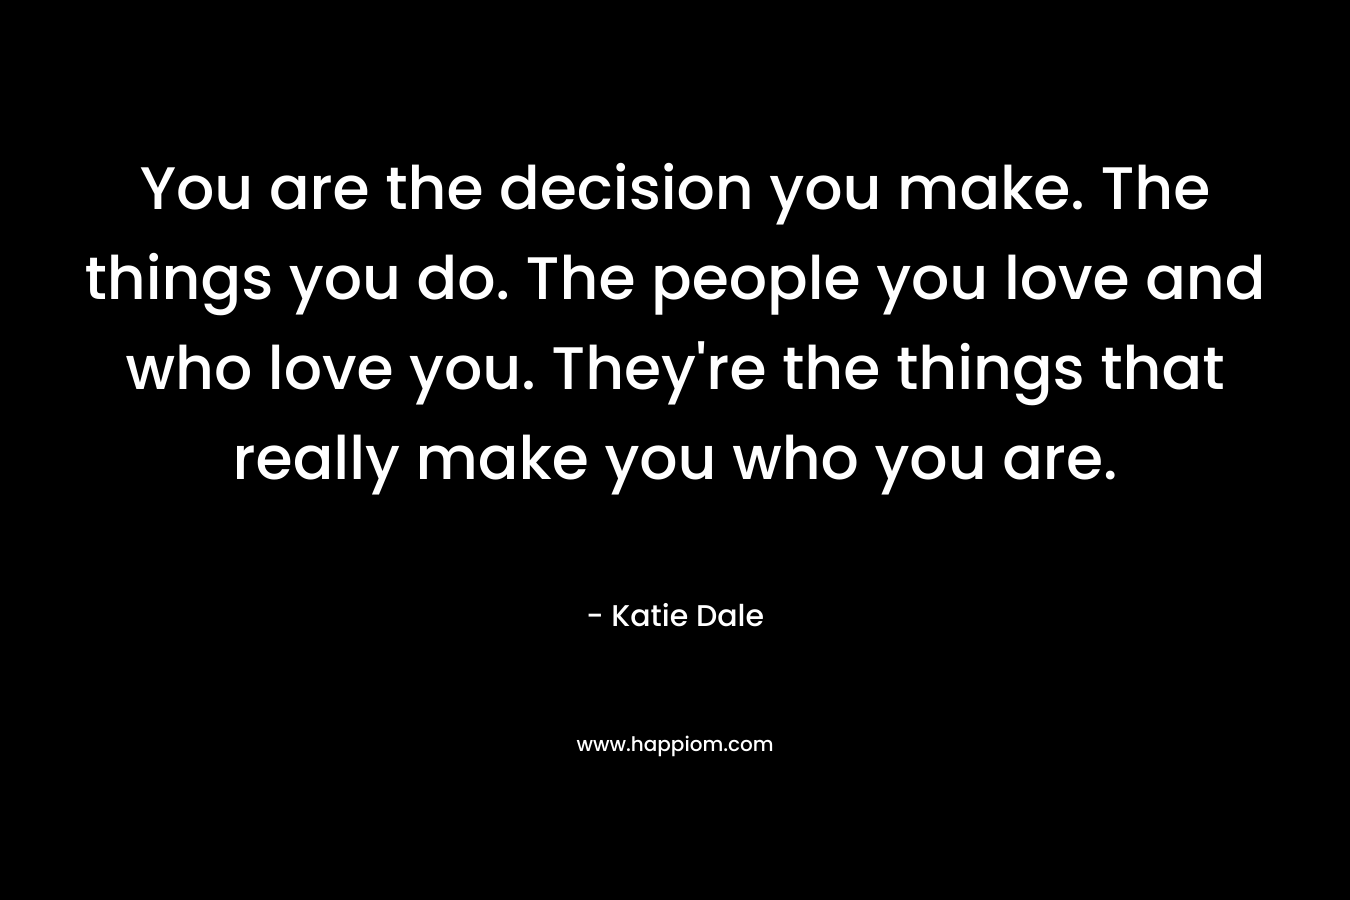 You are the decision you make. The things you do. The people you love and who love you. They’re the things that really make you who you are. – Katie Dale